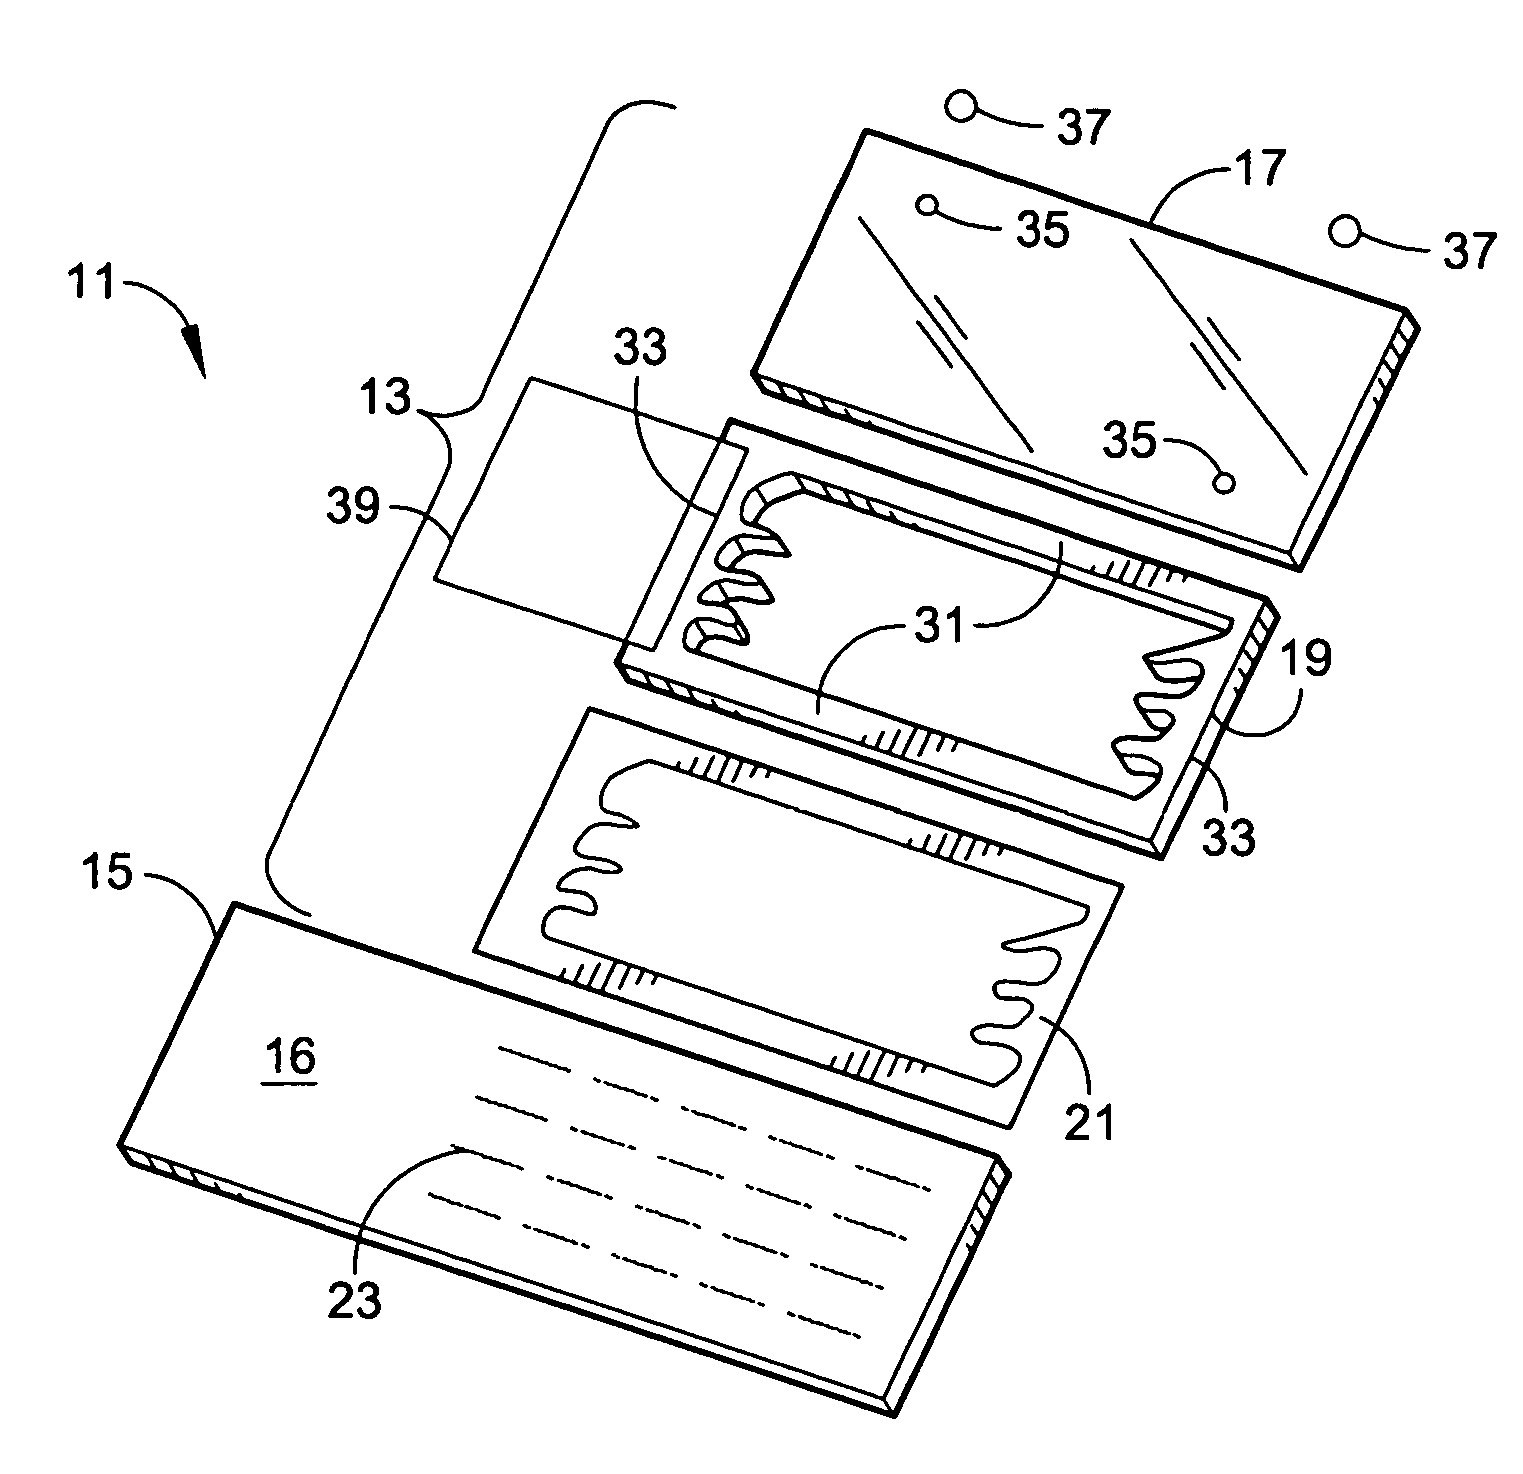 Microarray hybridization device having bubble-fracturing elements